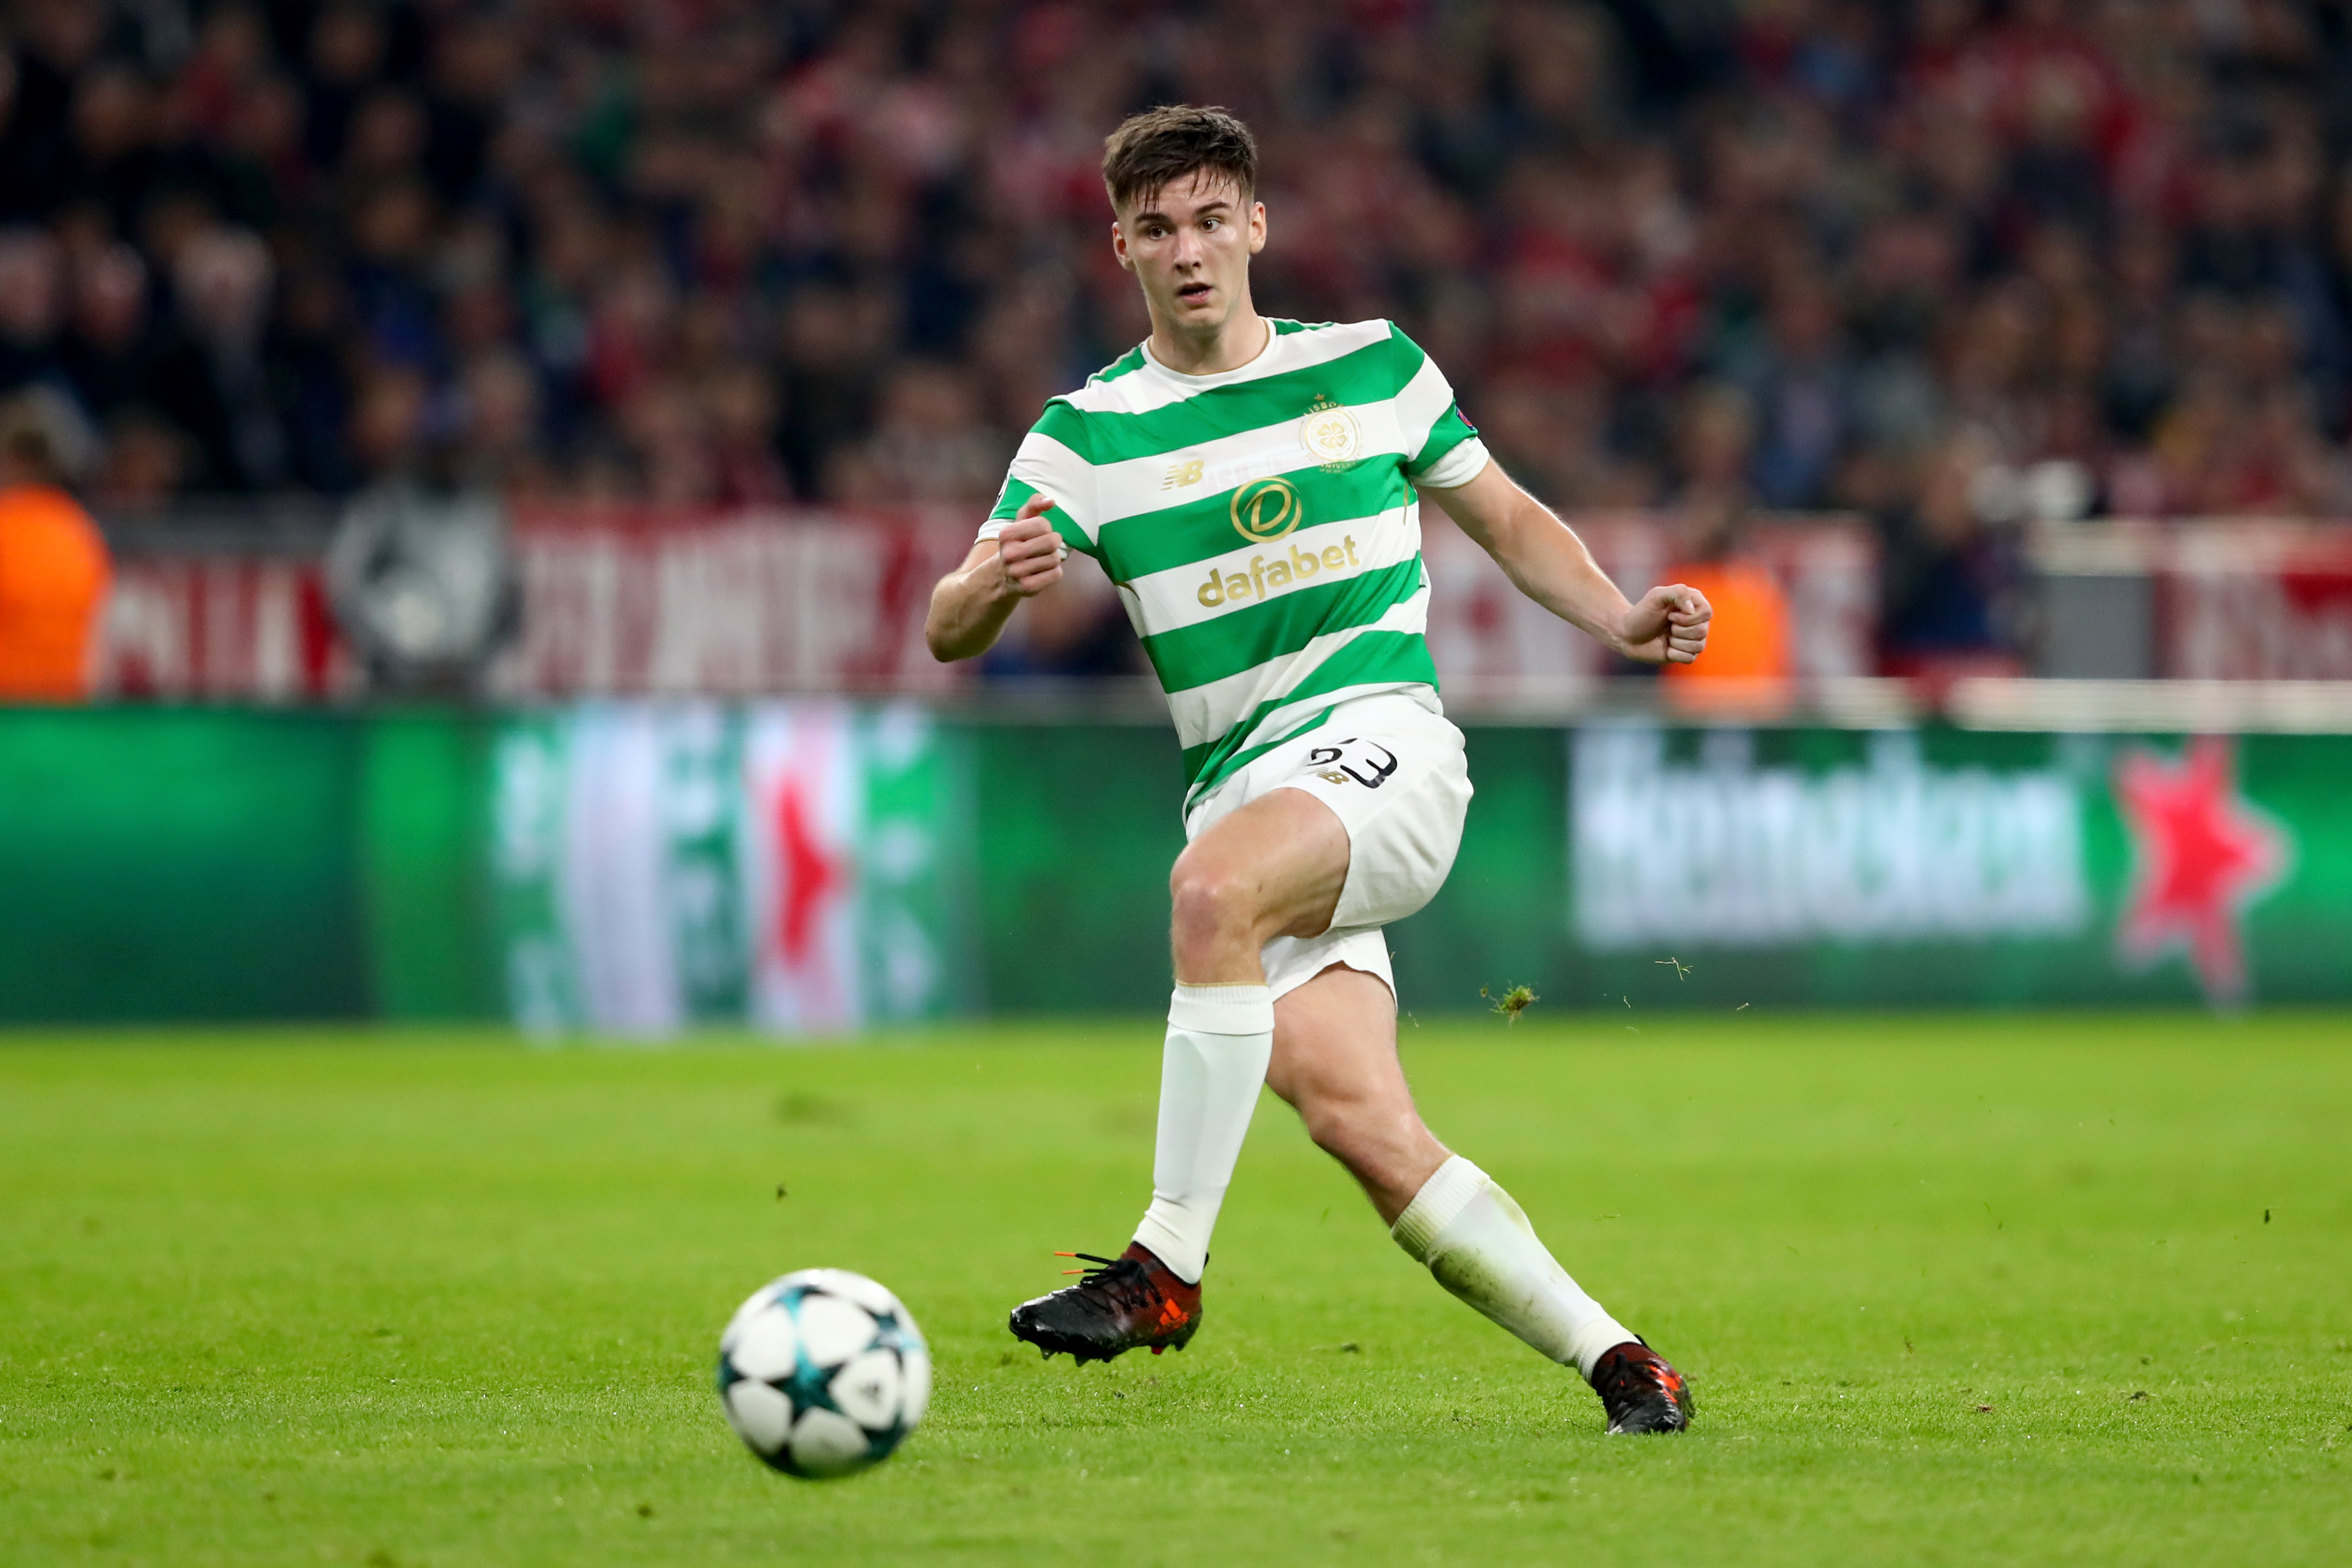 MUNICH, GERMANY - OCTOBER 18:  Kieran Tierney of Celtic runs with the ball during the UEFA Champions League group B match between Bayern Muenchen and Celtic FC at Allianz Arena on October 18, 2017 in Munich, Germany.  (Photo by Alexander Hassenstein/Bongarts/Getty Images)